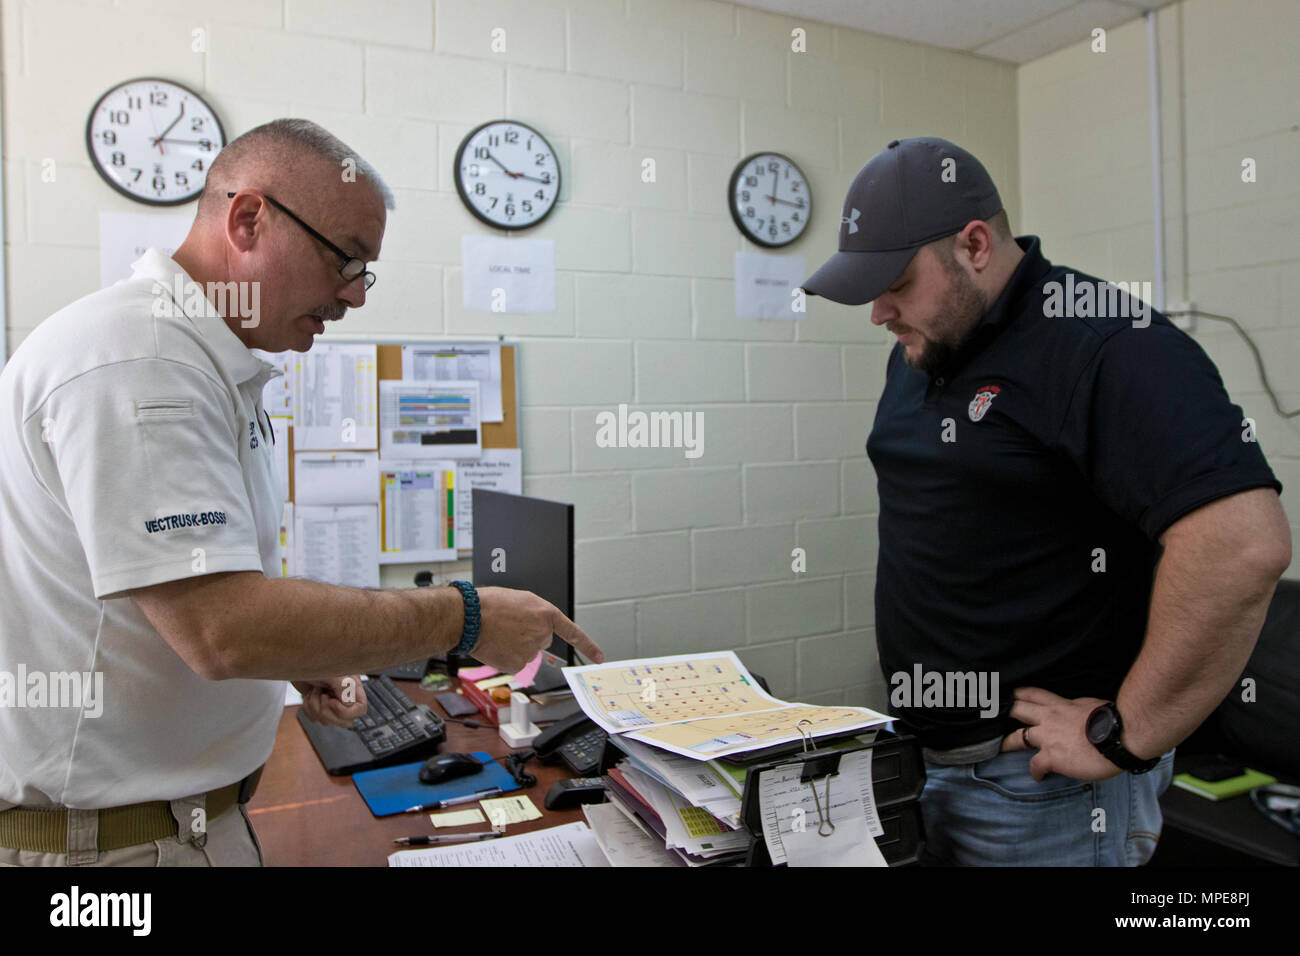 James Wenger, Assistant Chief for the Area Support Group – Kuwait joint emergency service station, (left), shows James Lyndsey, an Explosives Safety Specialist with the U.S. Army Defense Ammunition Center, (right), documents and maps during the 2017 Worldwide Ammunition Logistics and Explosives Safety Review in Camp Arifjan, Kuwait, on Feb. 7, 2017. (U.S. Army Photo by Staff Sgt. Dalton Smith) Stock Photo